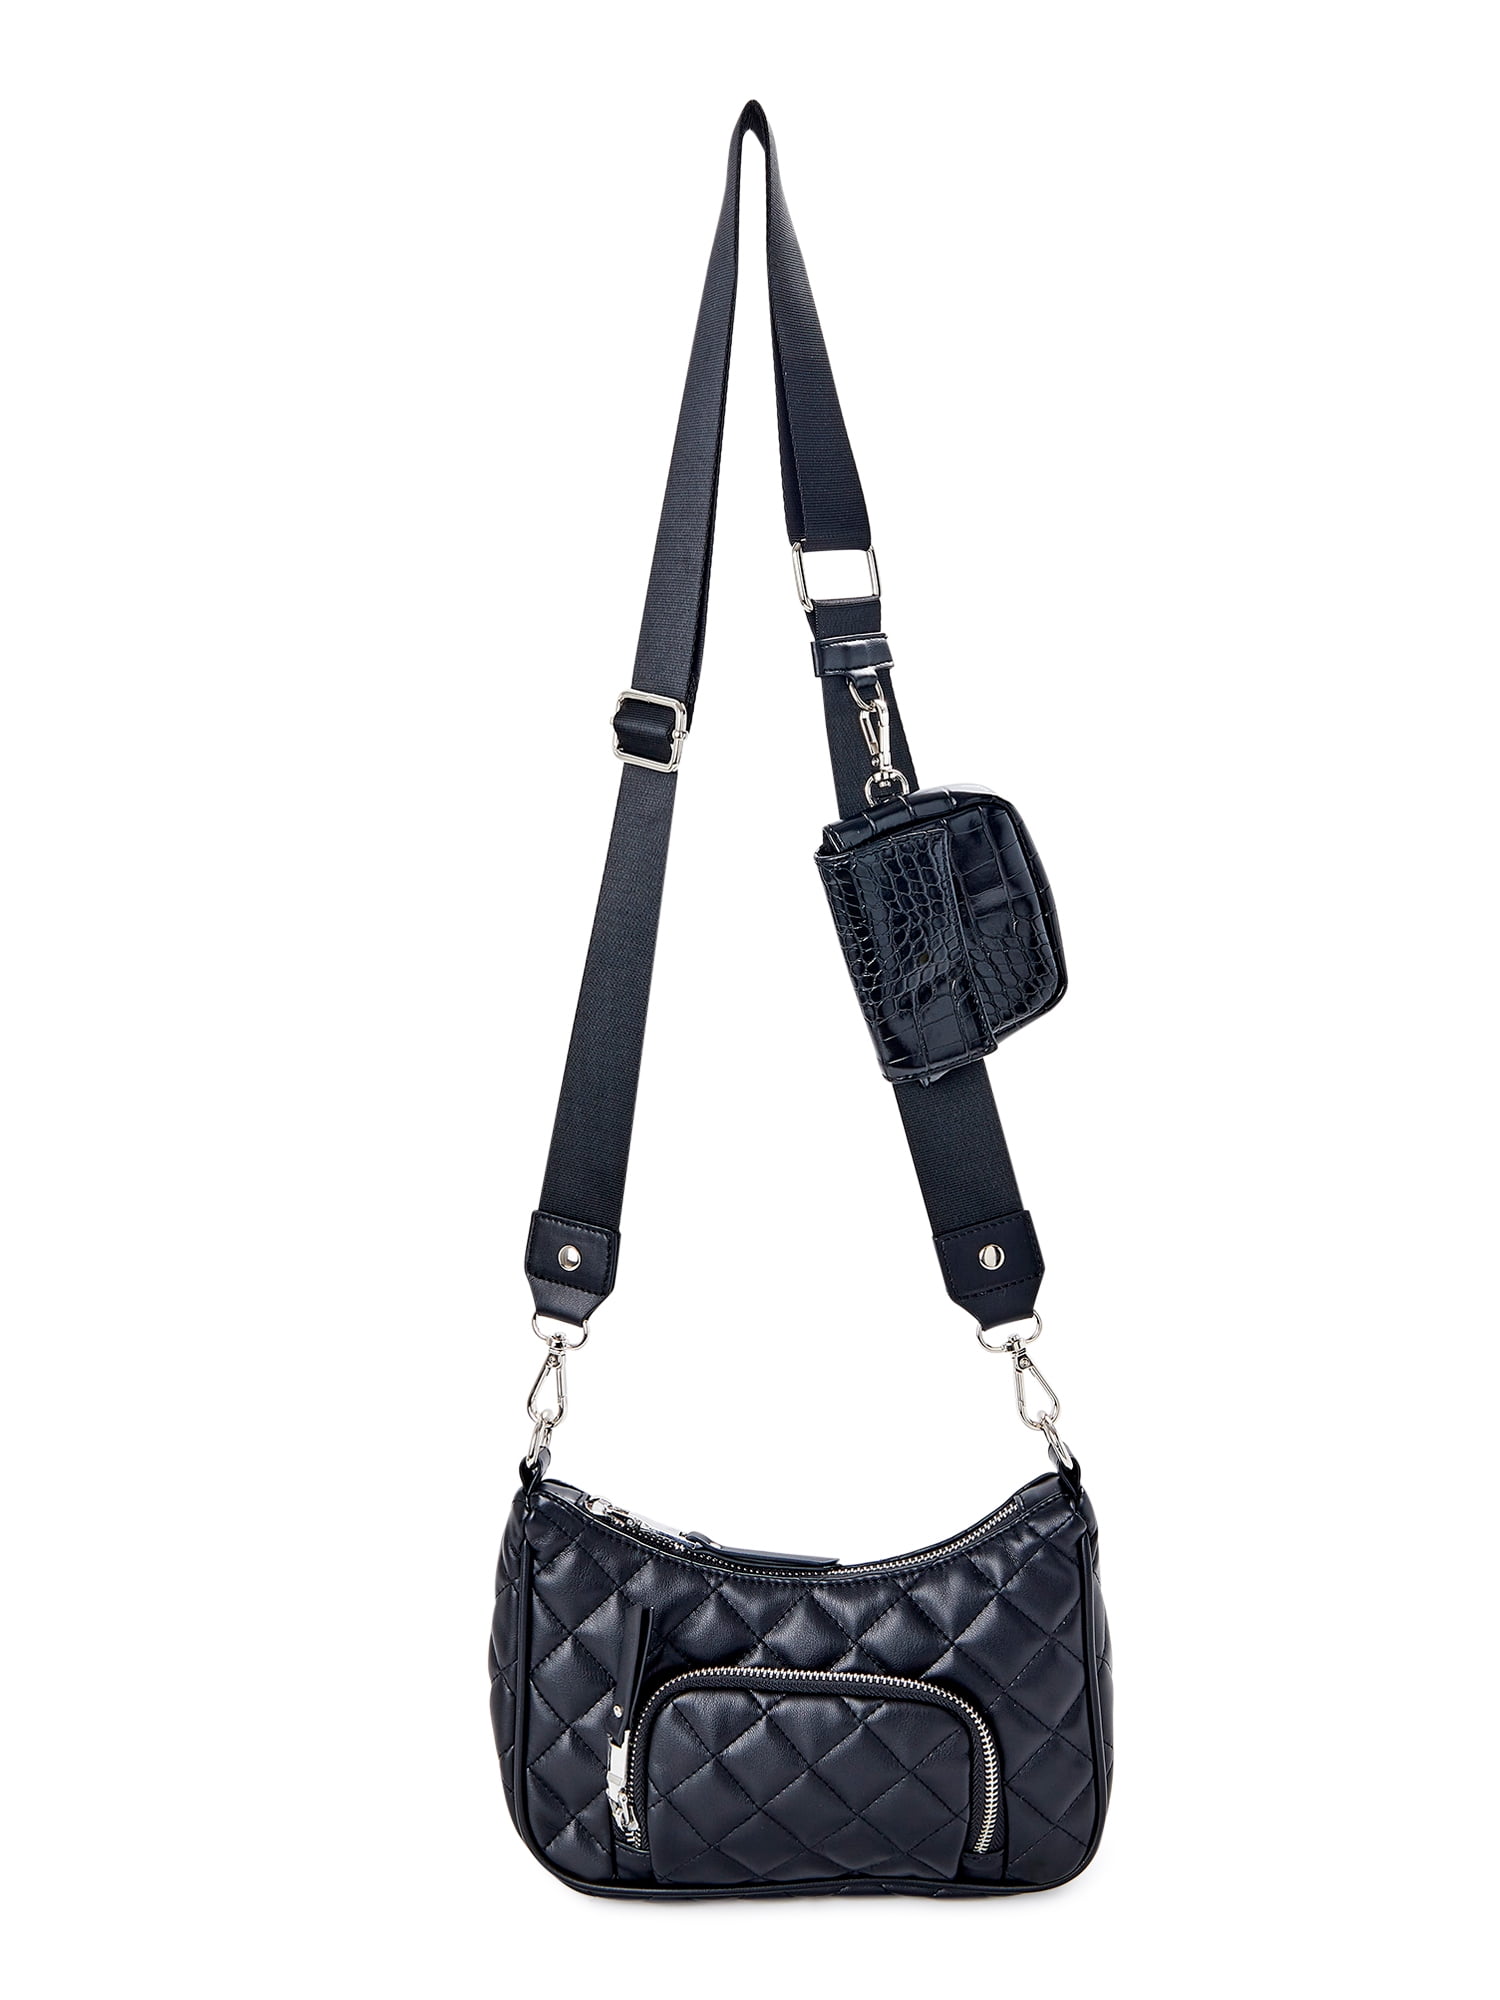 Madden NYC Charm Chain Crossbody Bag with Removable Pouch 